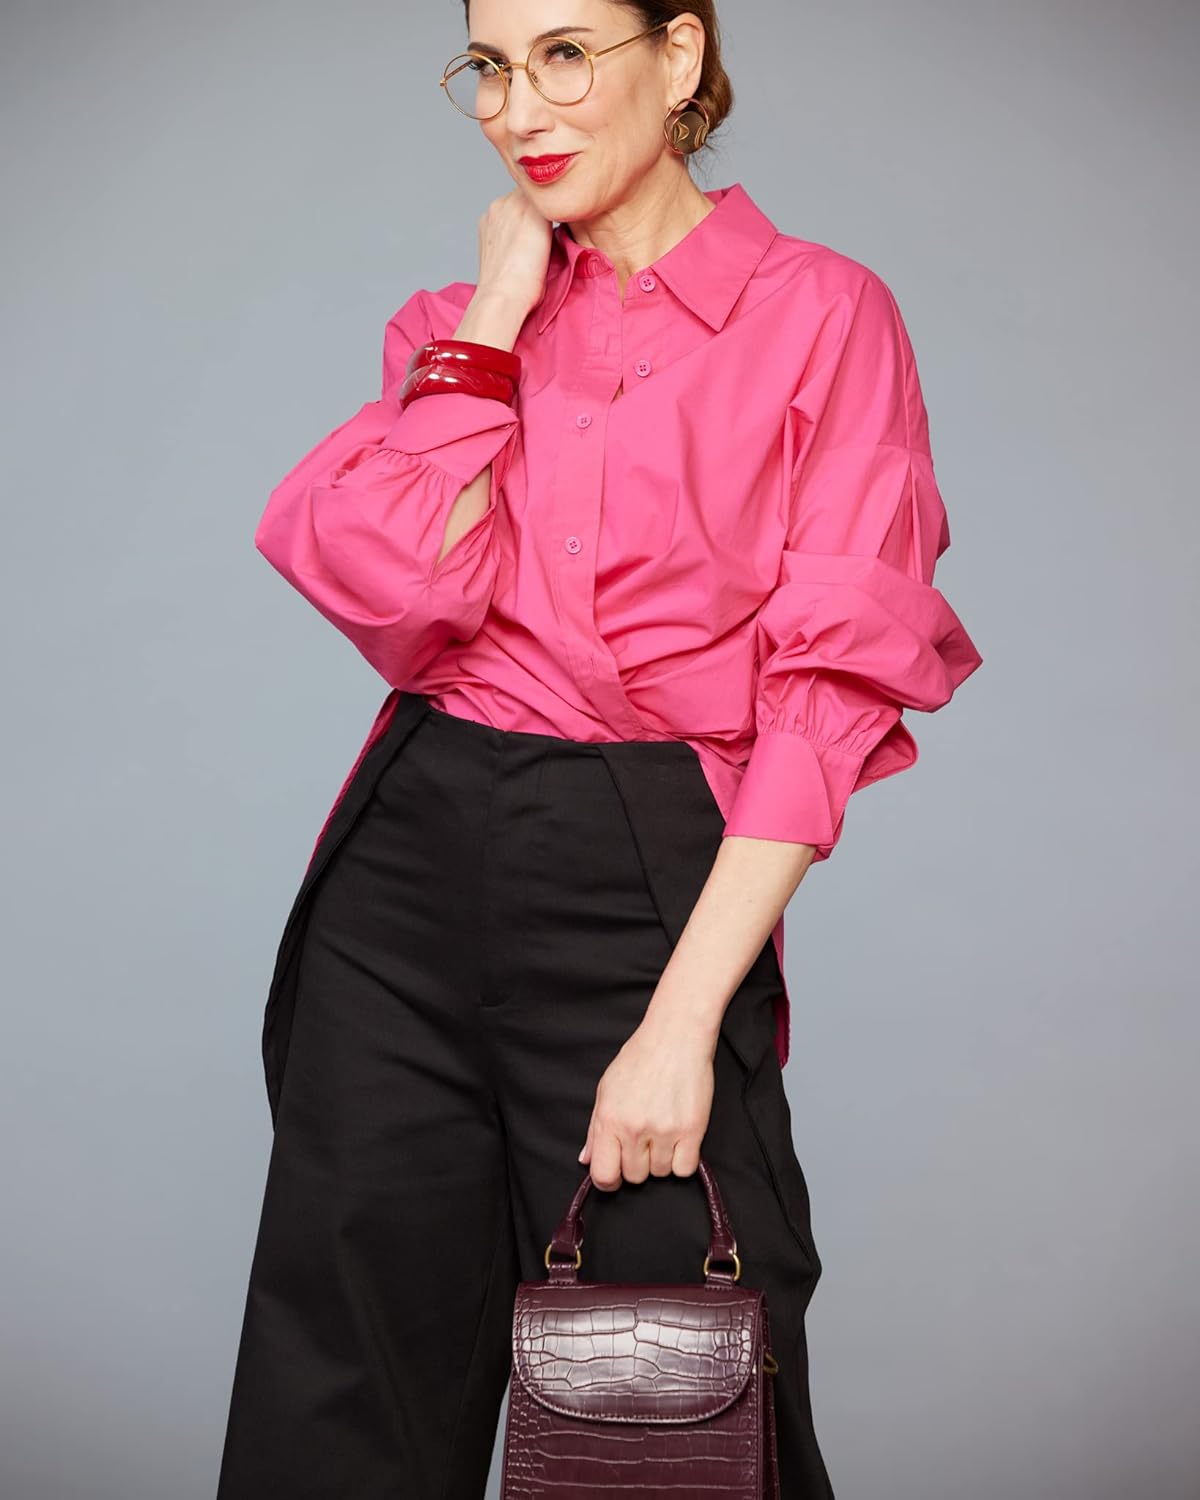 The Drop Women' Hot Pink High Low Hem Button Front Blouse by @carla.rockmore